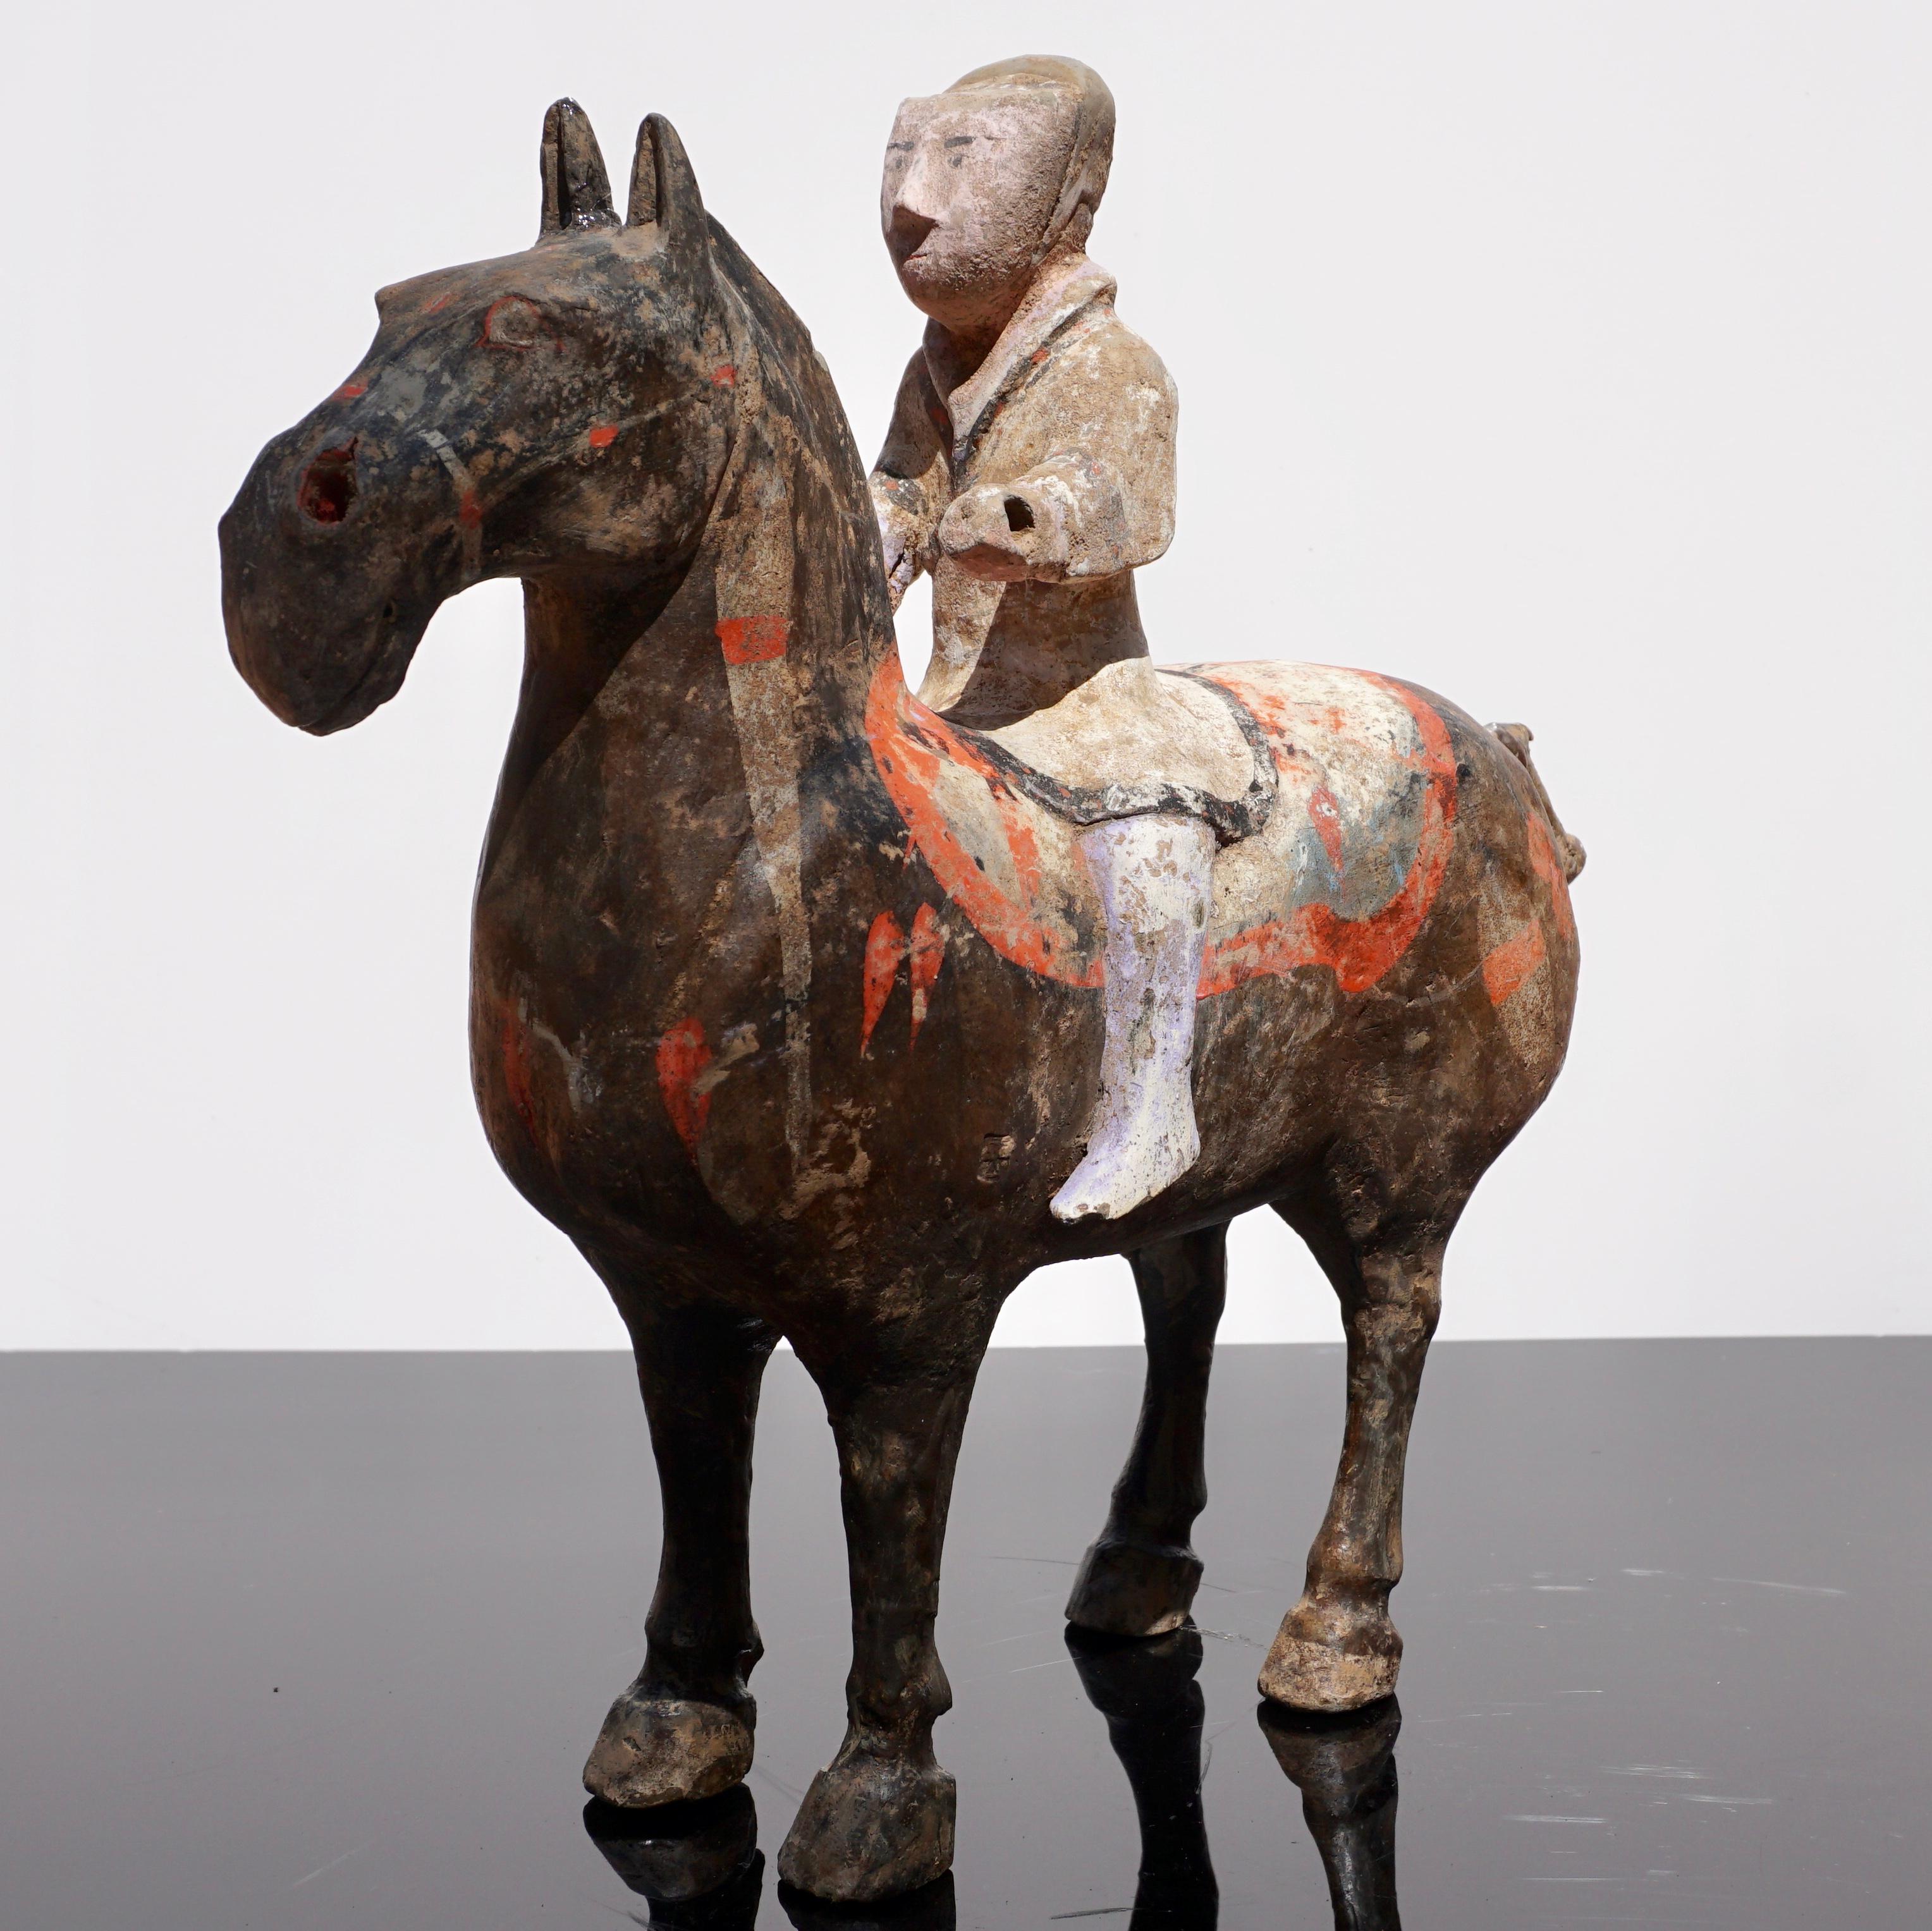 A Chinese painted grey pottery horse and rider, Shaanxi province. These tomb statues were common for over a thousand years and were to accompany the deceased in the afterlife for those who were affluent.

Western Han dynasty (206 BC-220 AD)
 
The